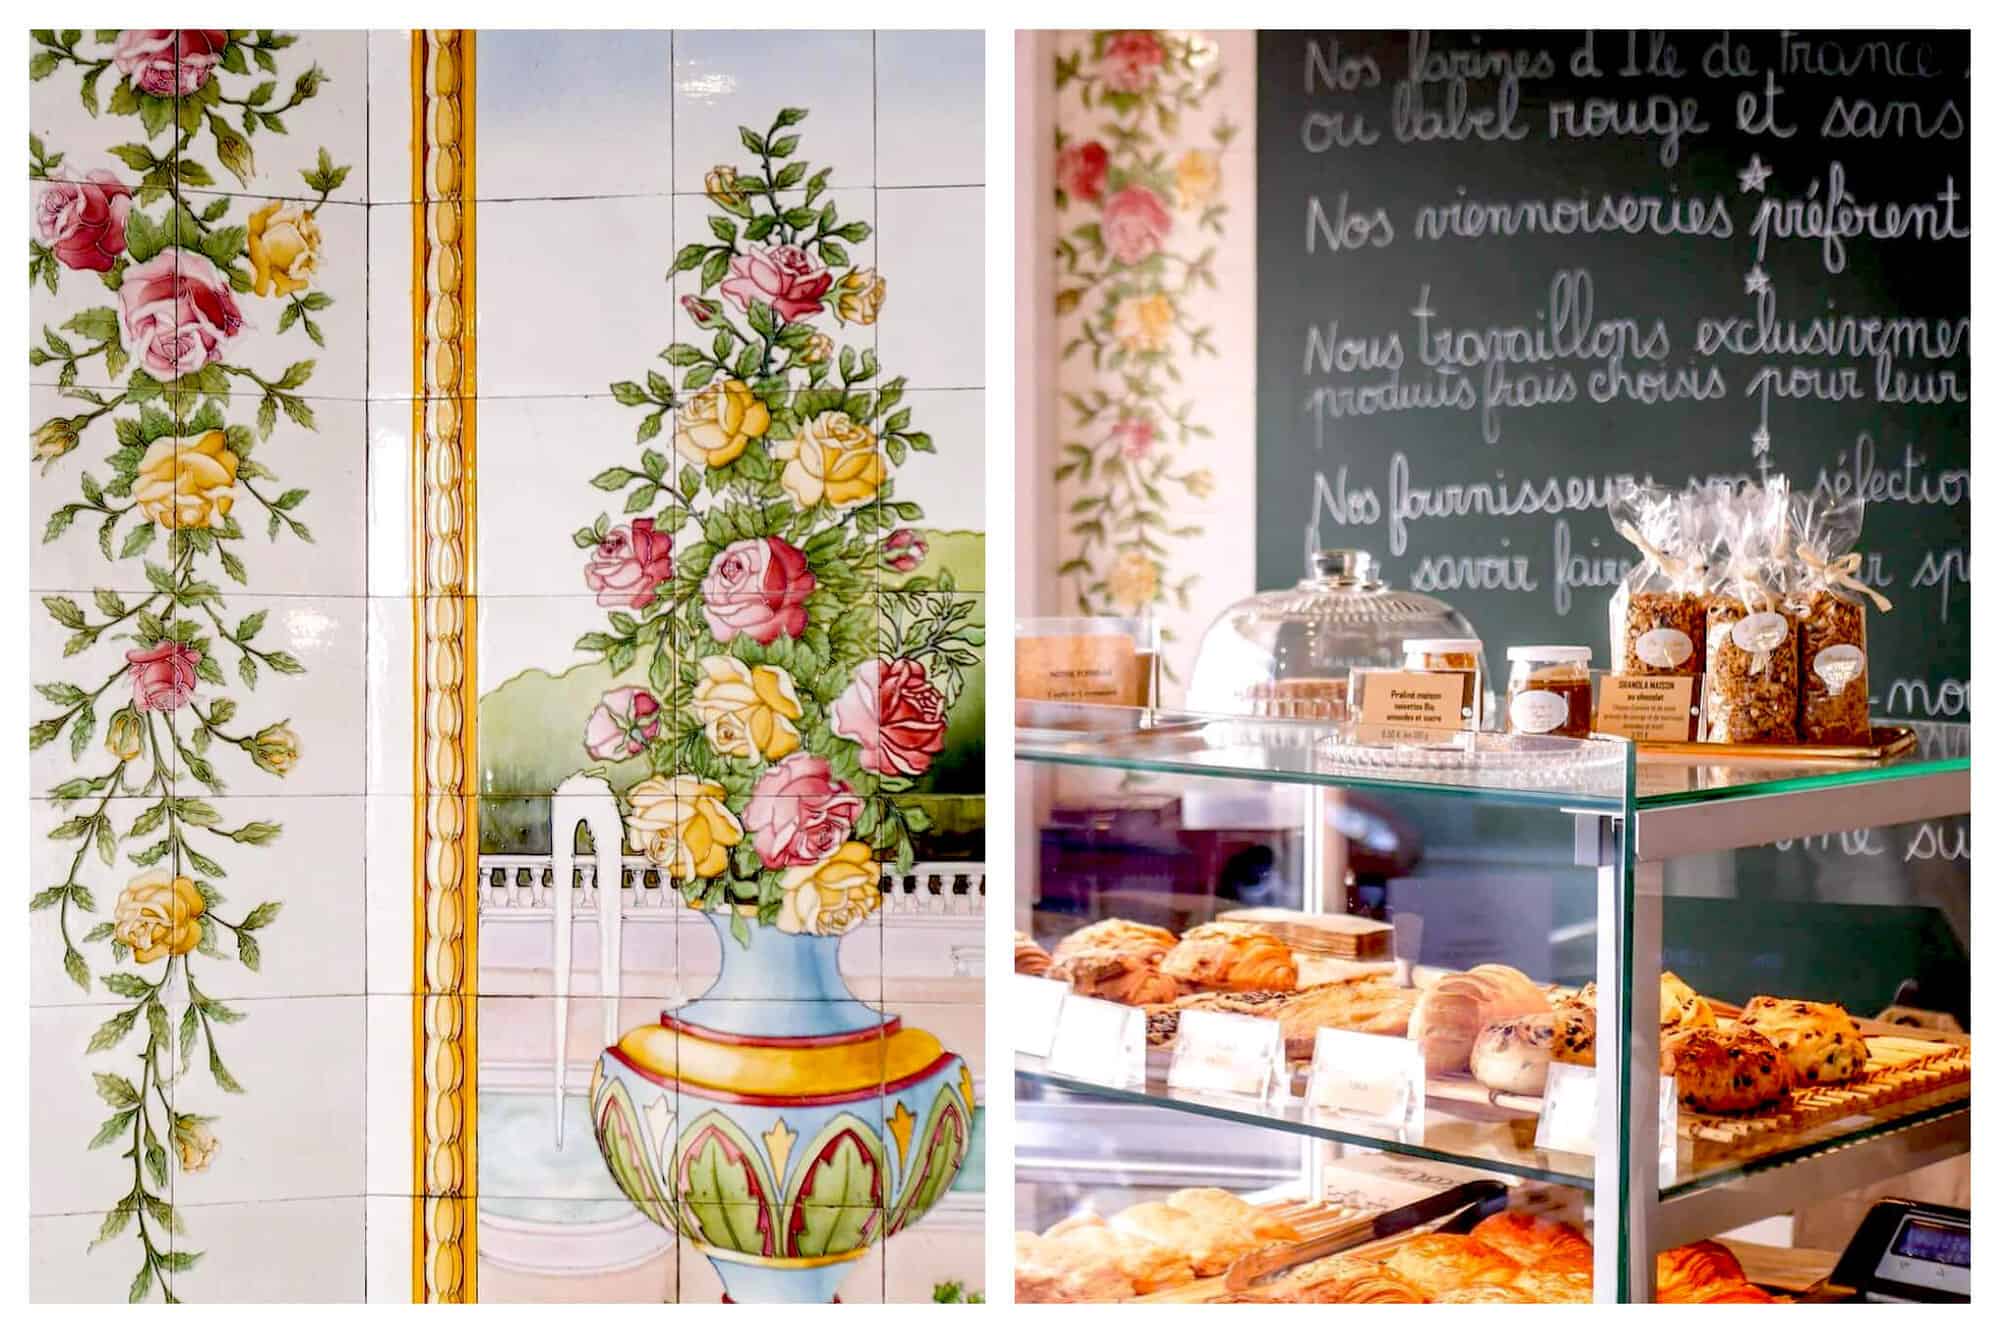 Left: a mosaic inside the Boulangerie du Square. On the left is a vine with pink and yellow roses on it, and to the right is a blue, red, green, and yellow vase with pink and yellow roses coming out of it. Right: a display case filled with different types of French pastries. A sign with the daily specials written in French is visible in the background.